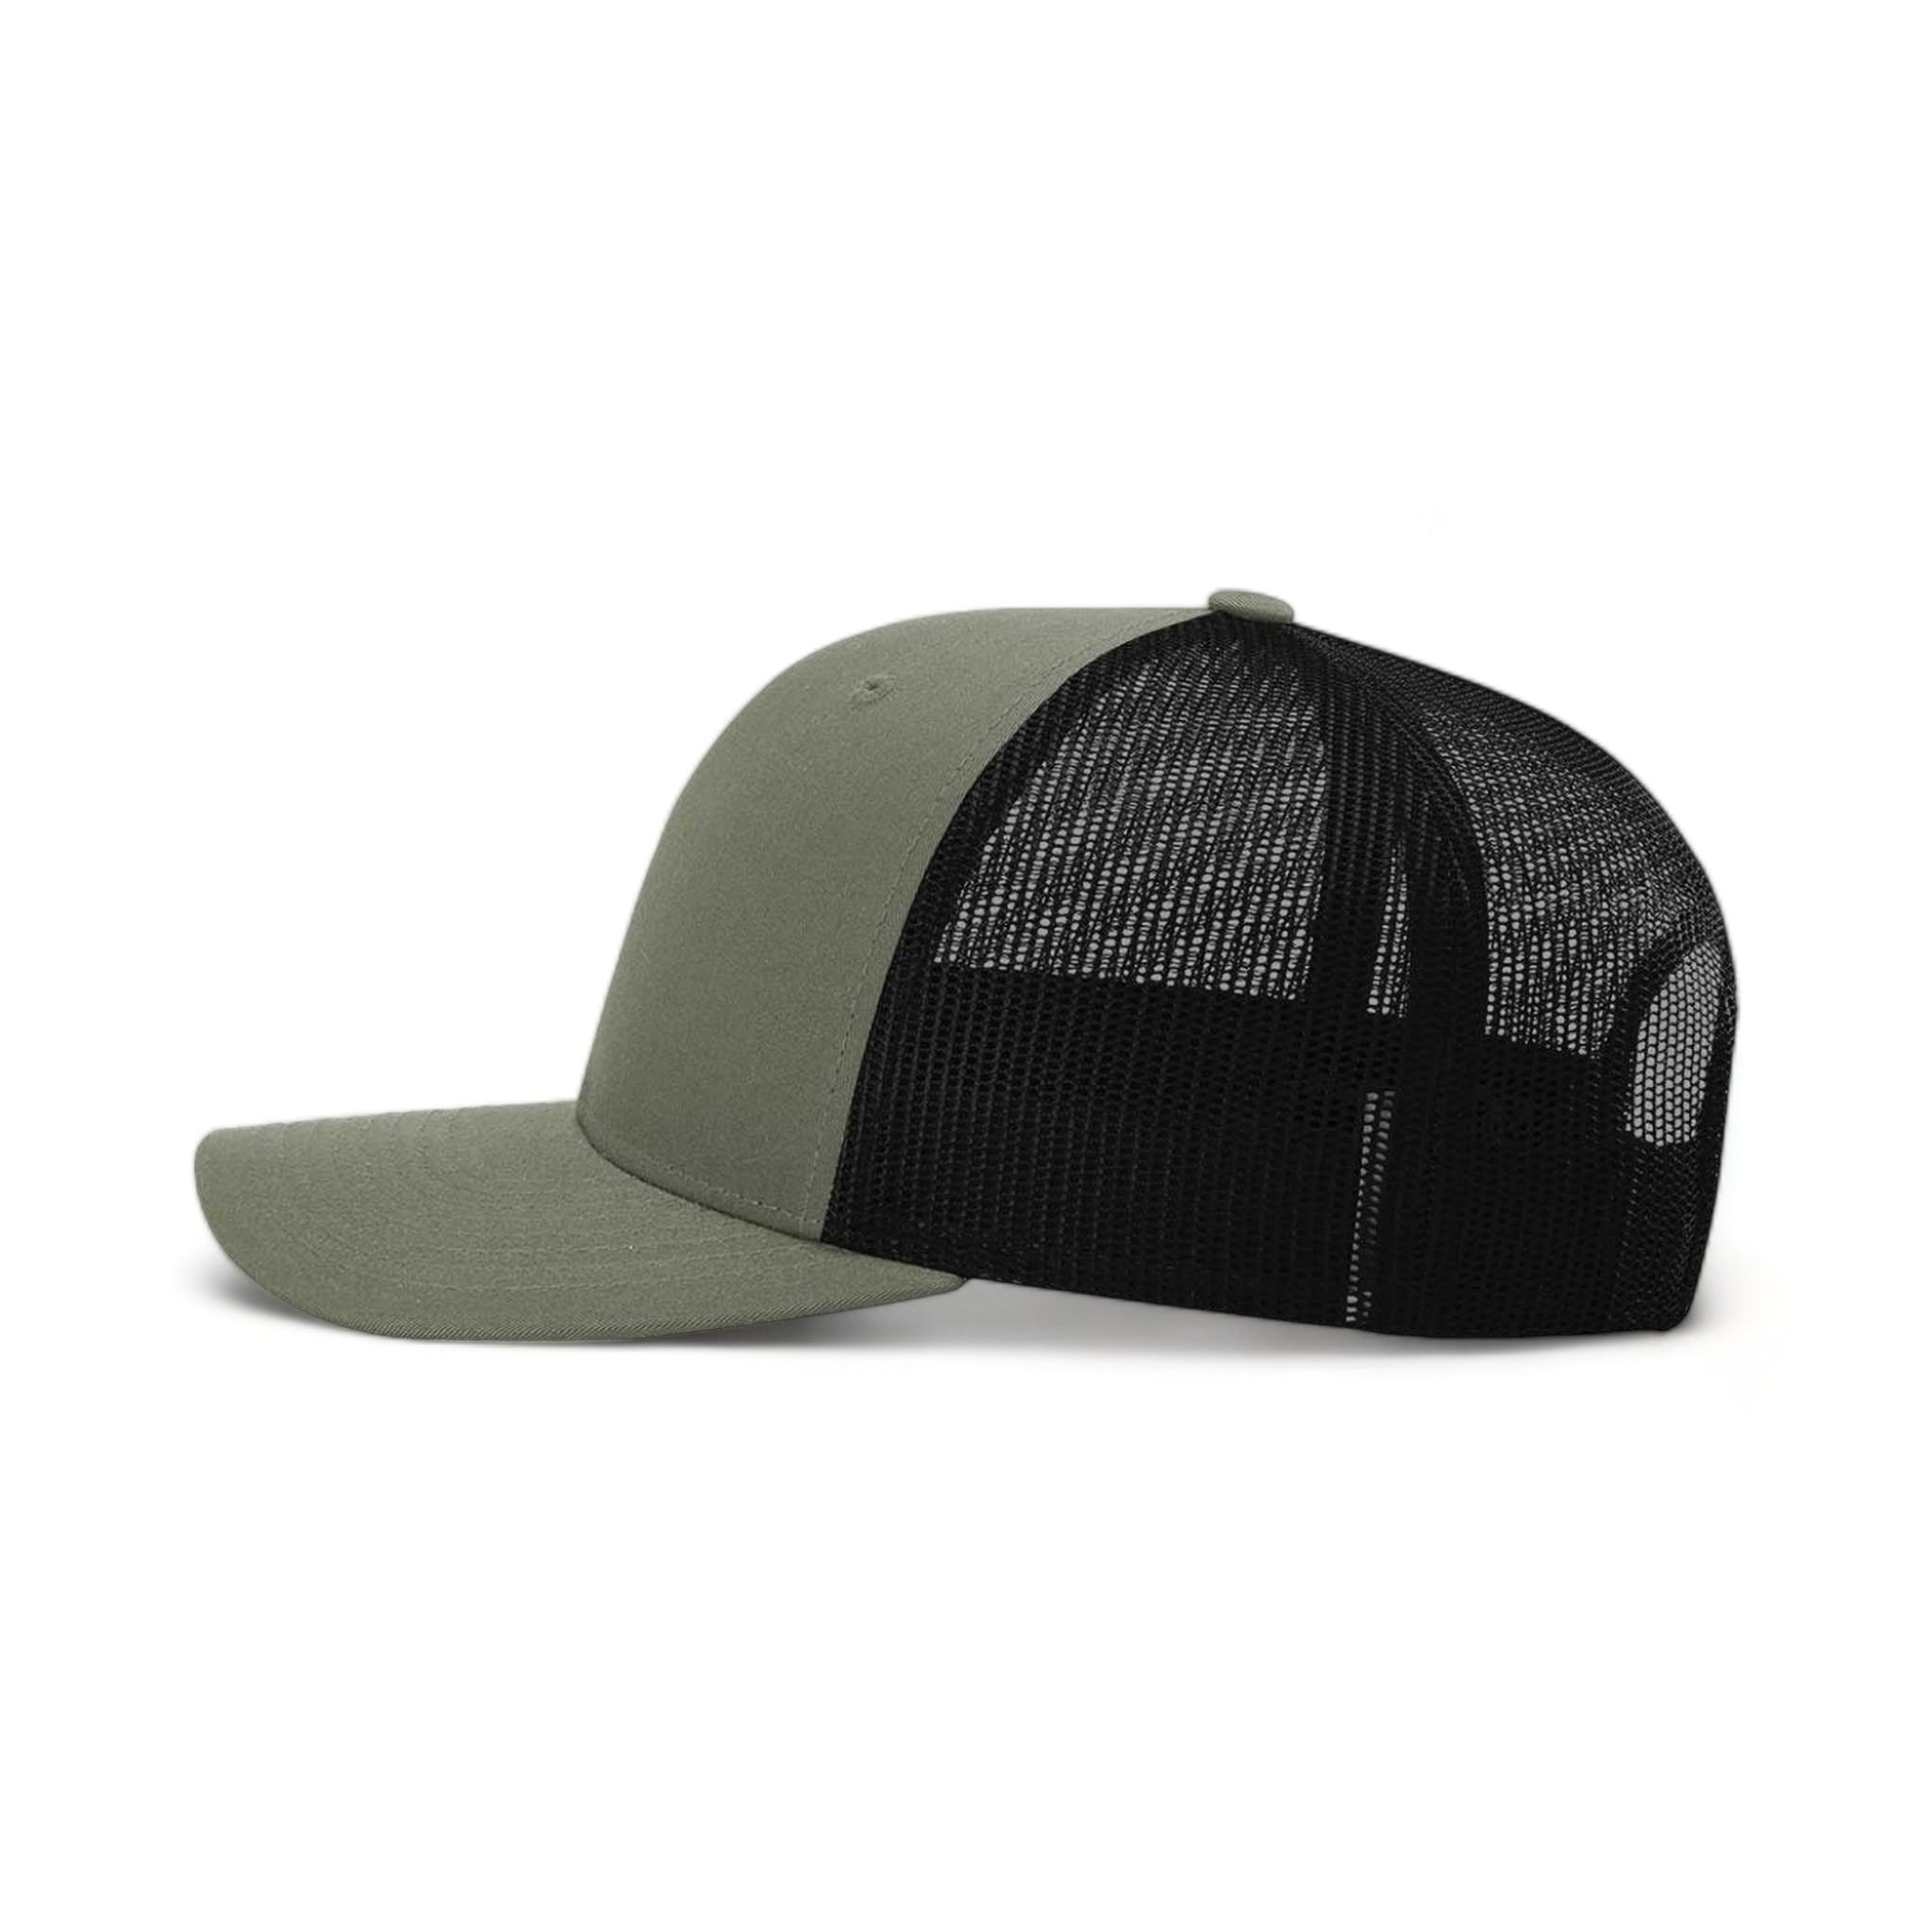 Side view of Richardson 115 custom hat in loden green and black